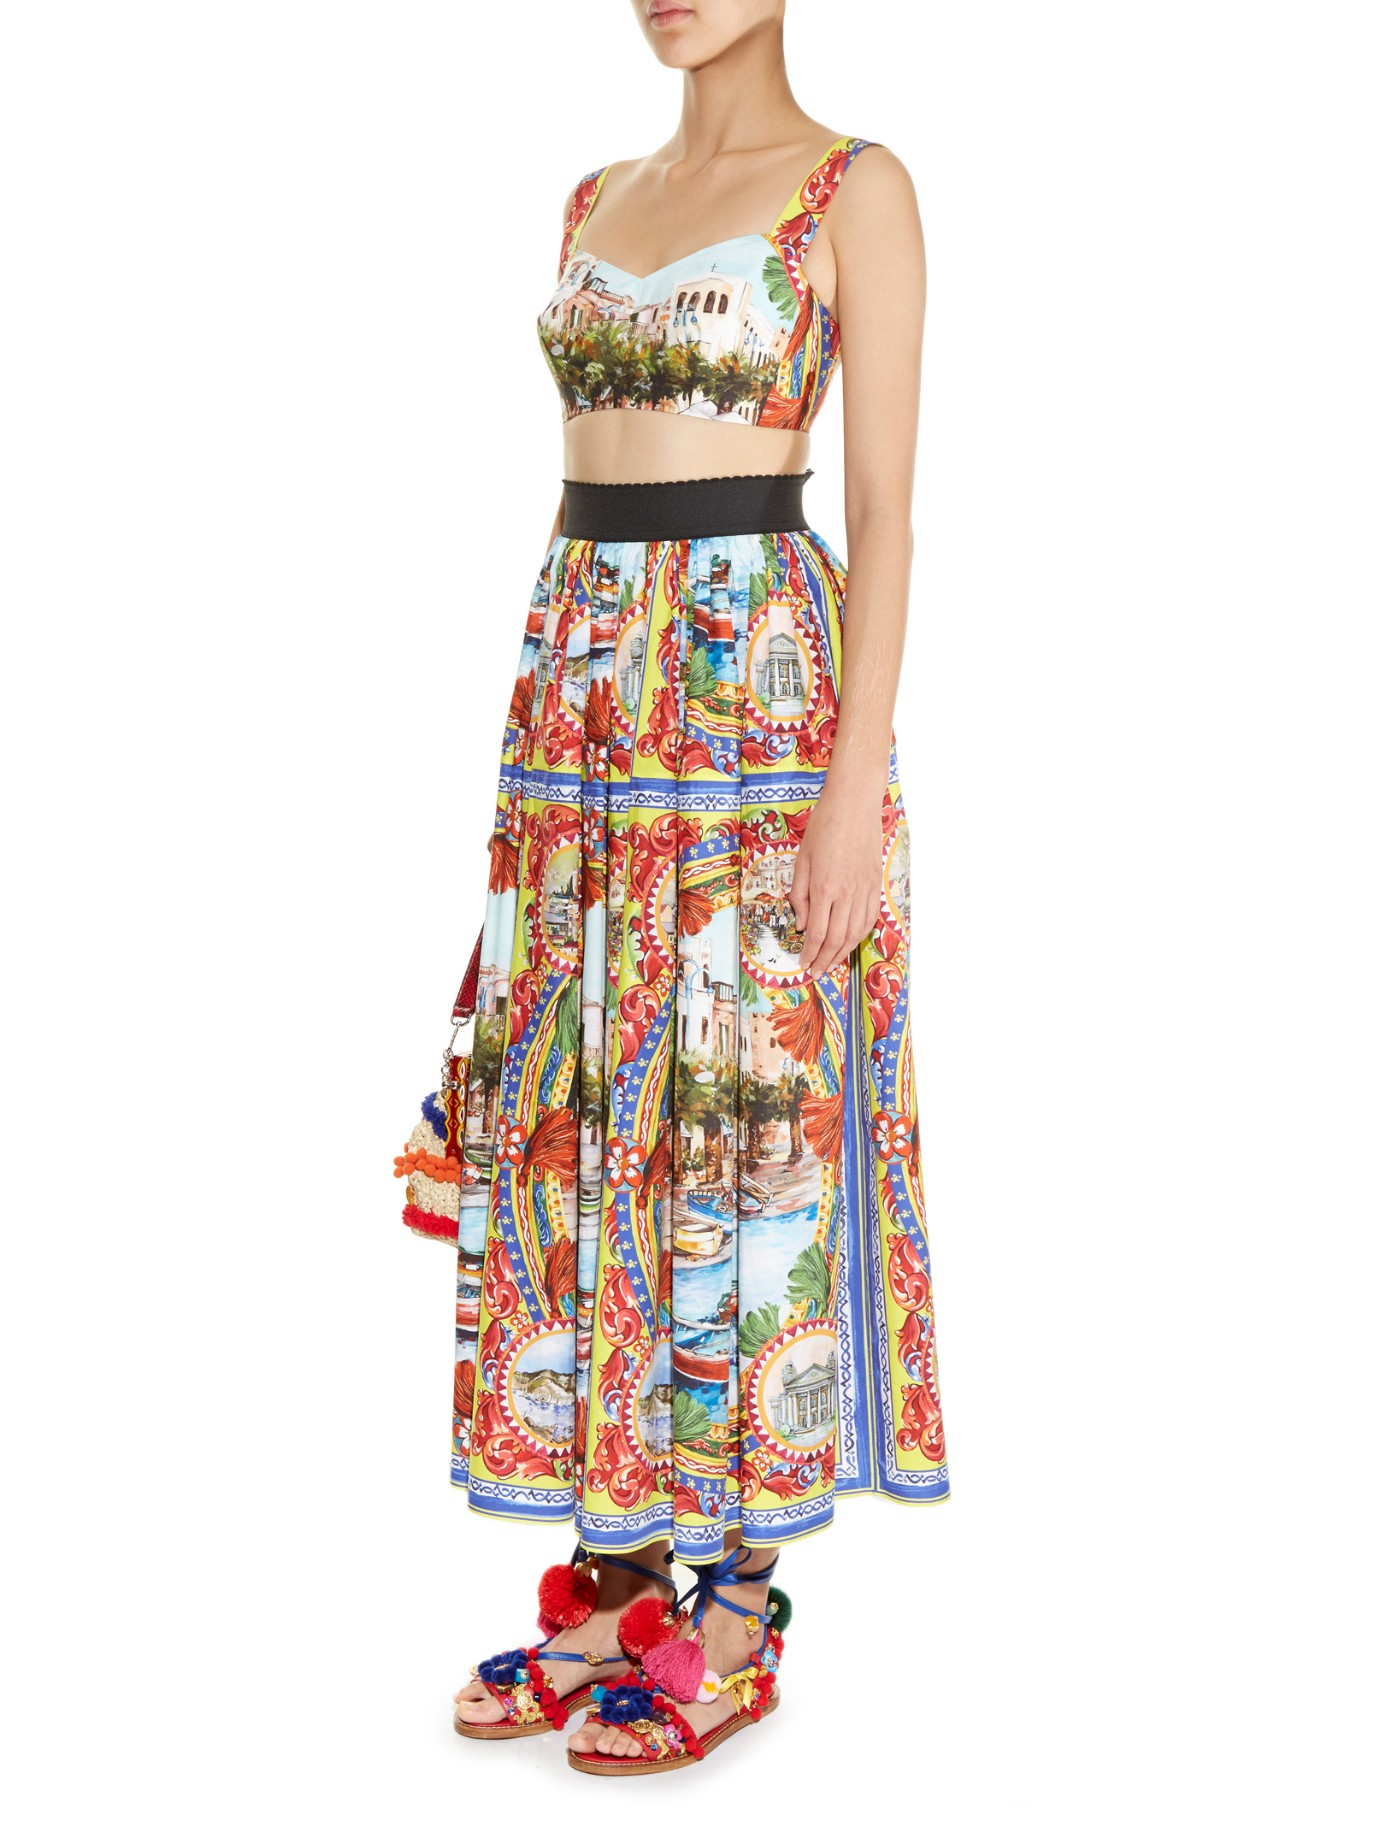 dolce and gabbana skirt and top